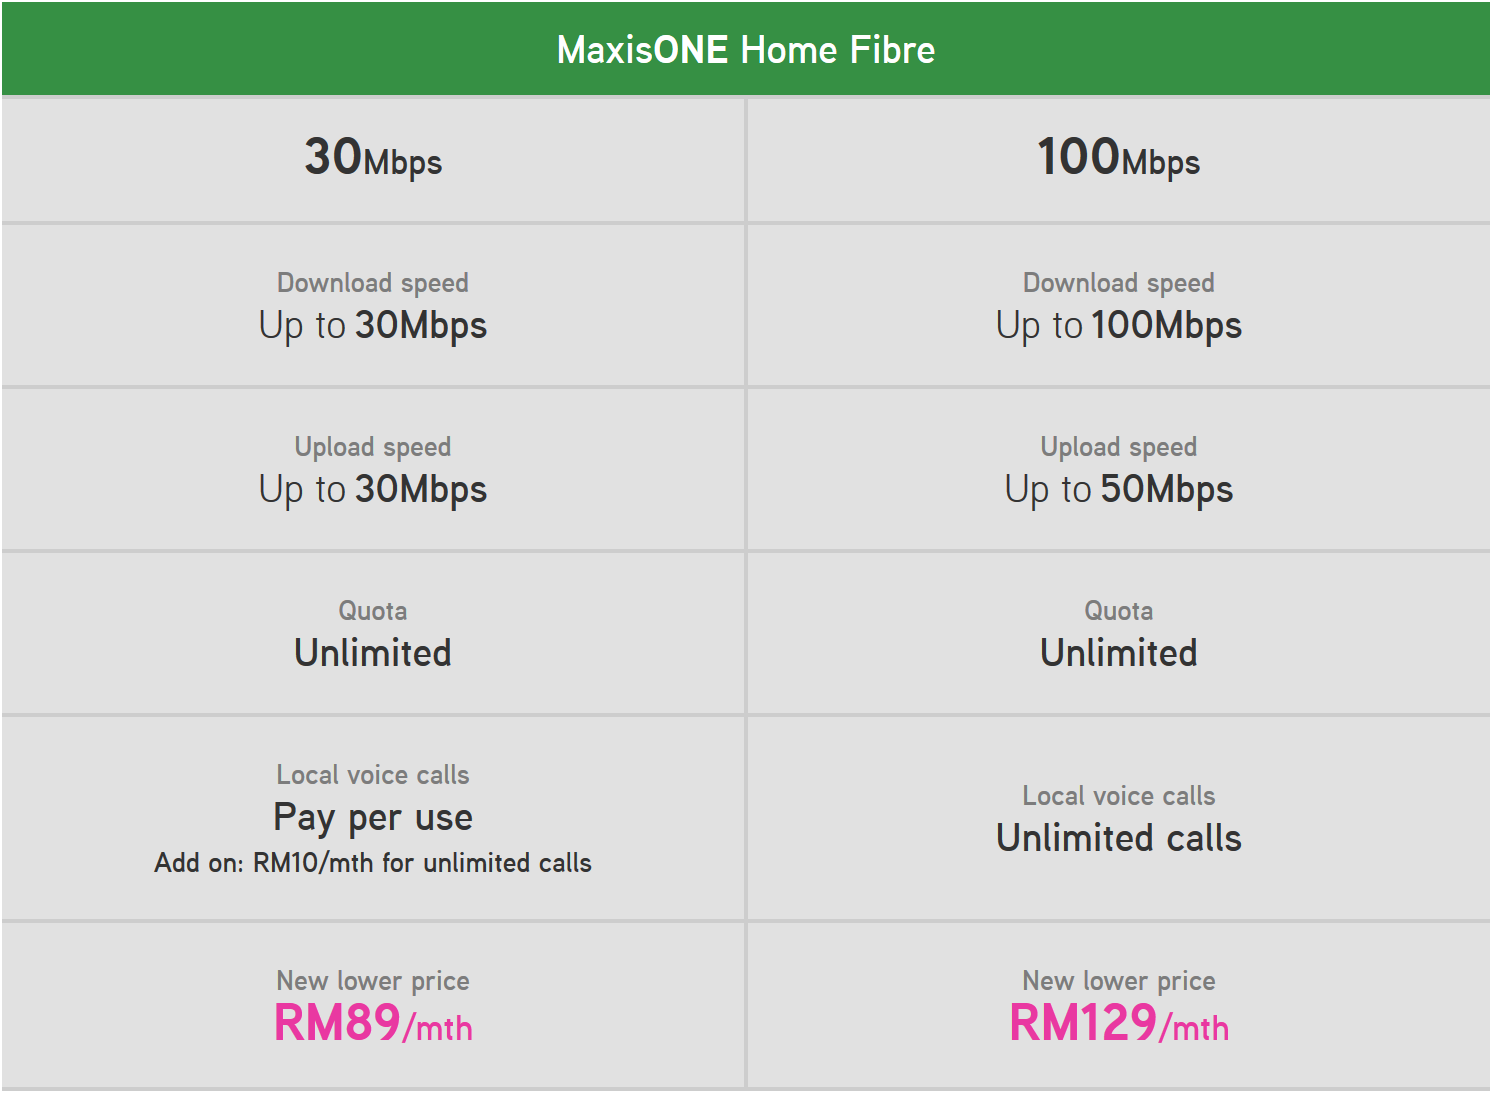 Maxis has reduced the price of their 100Mbps and 30Mbps plans.